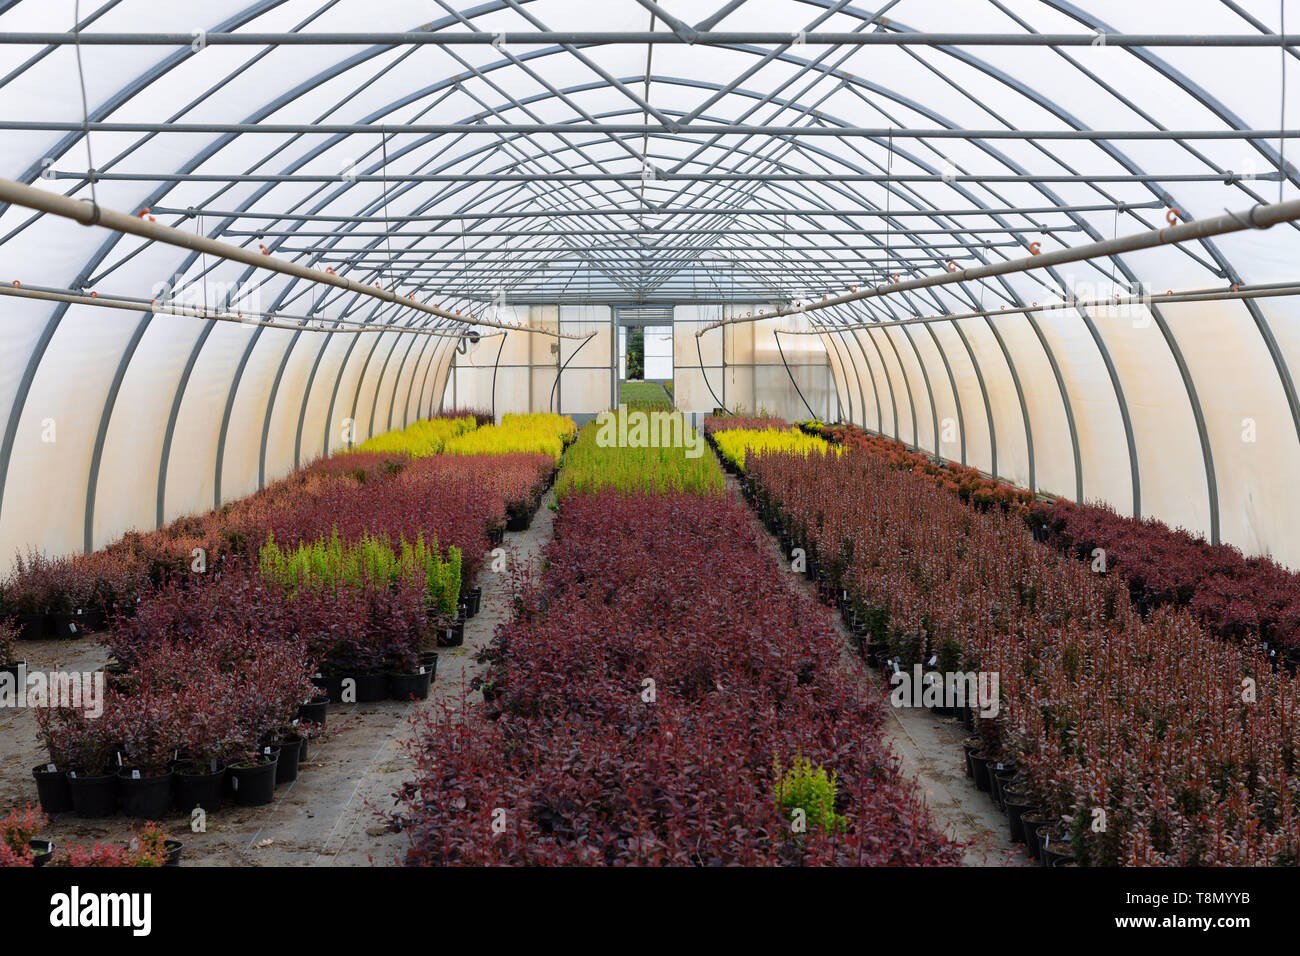 Rows of young tree plants in a nursery greenhouse store Stock Photo